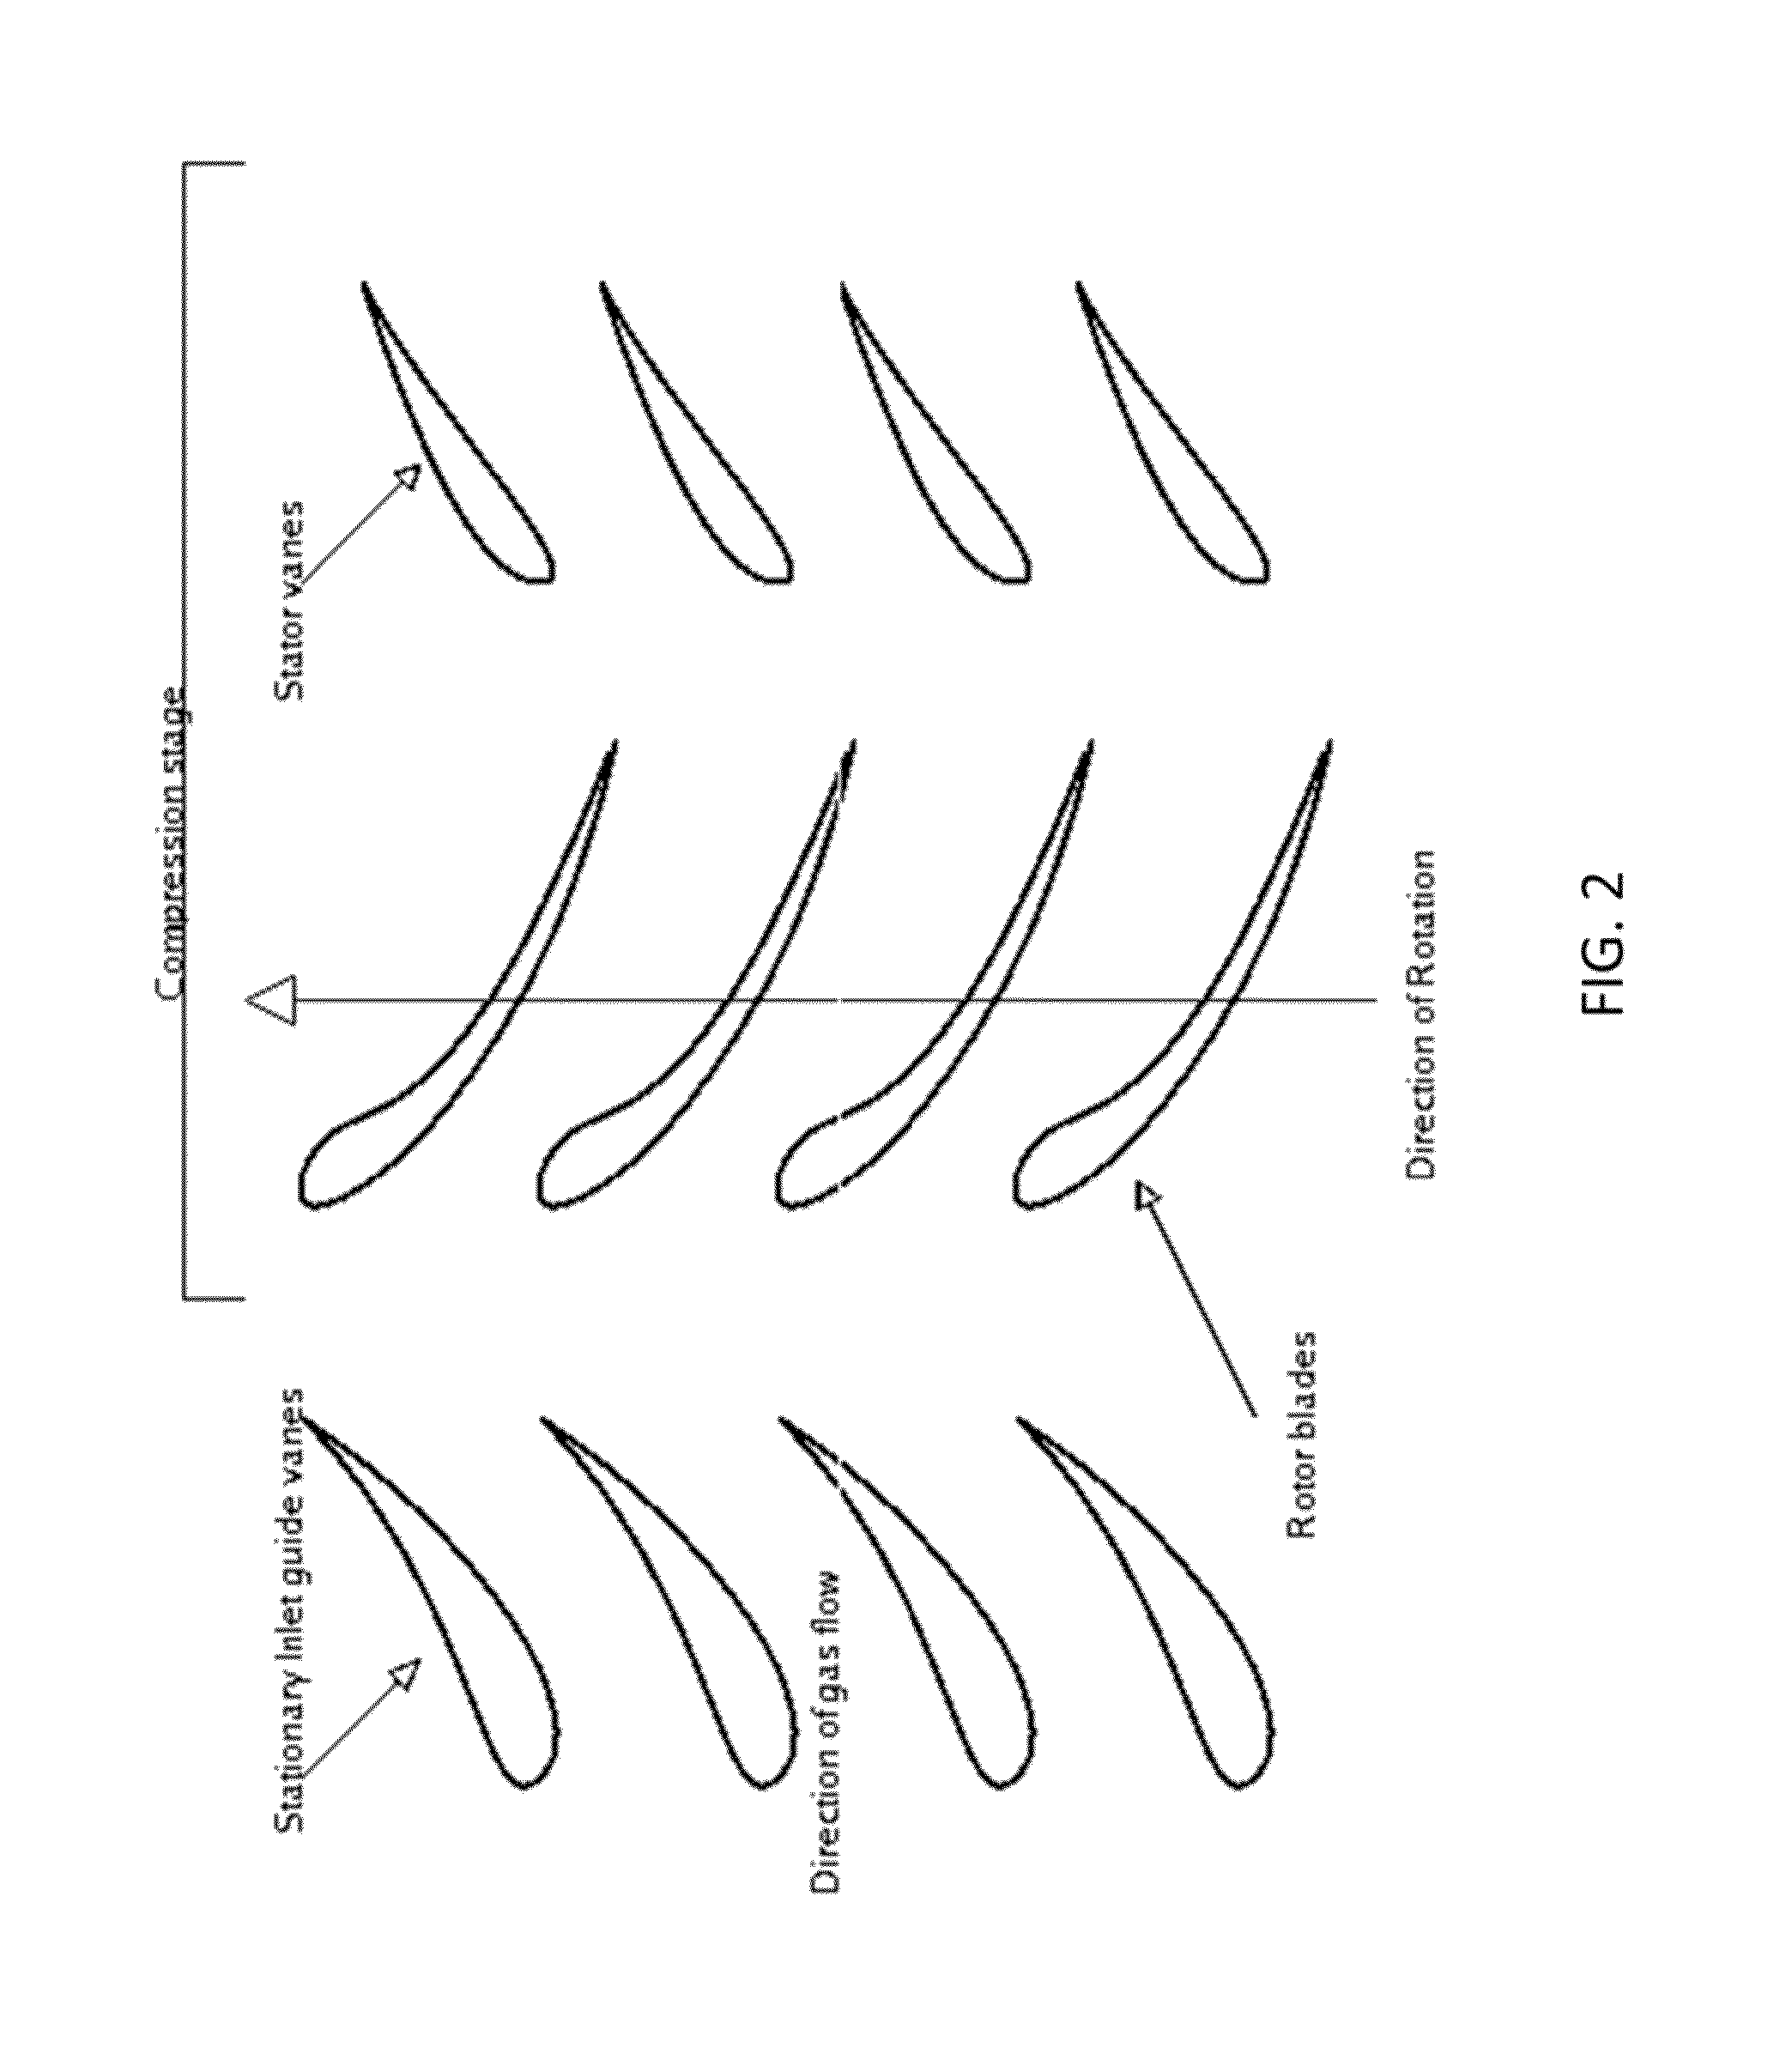 Rotating stall detection using optical measurement of blade untwist